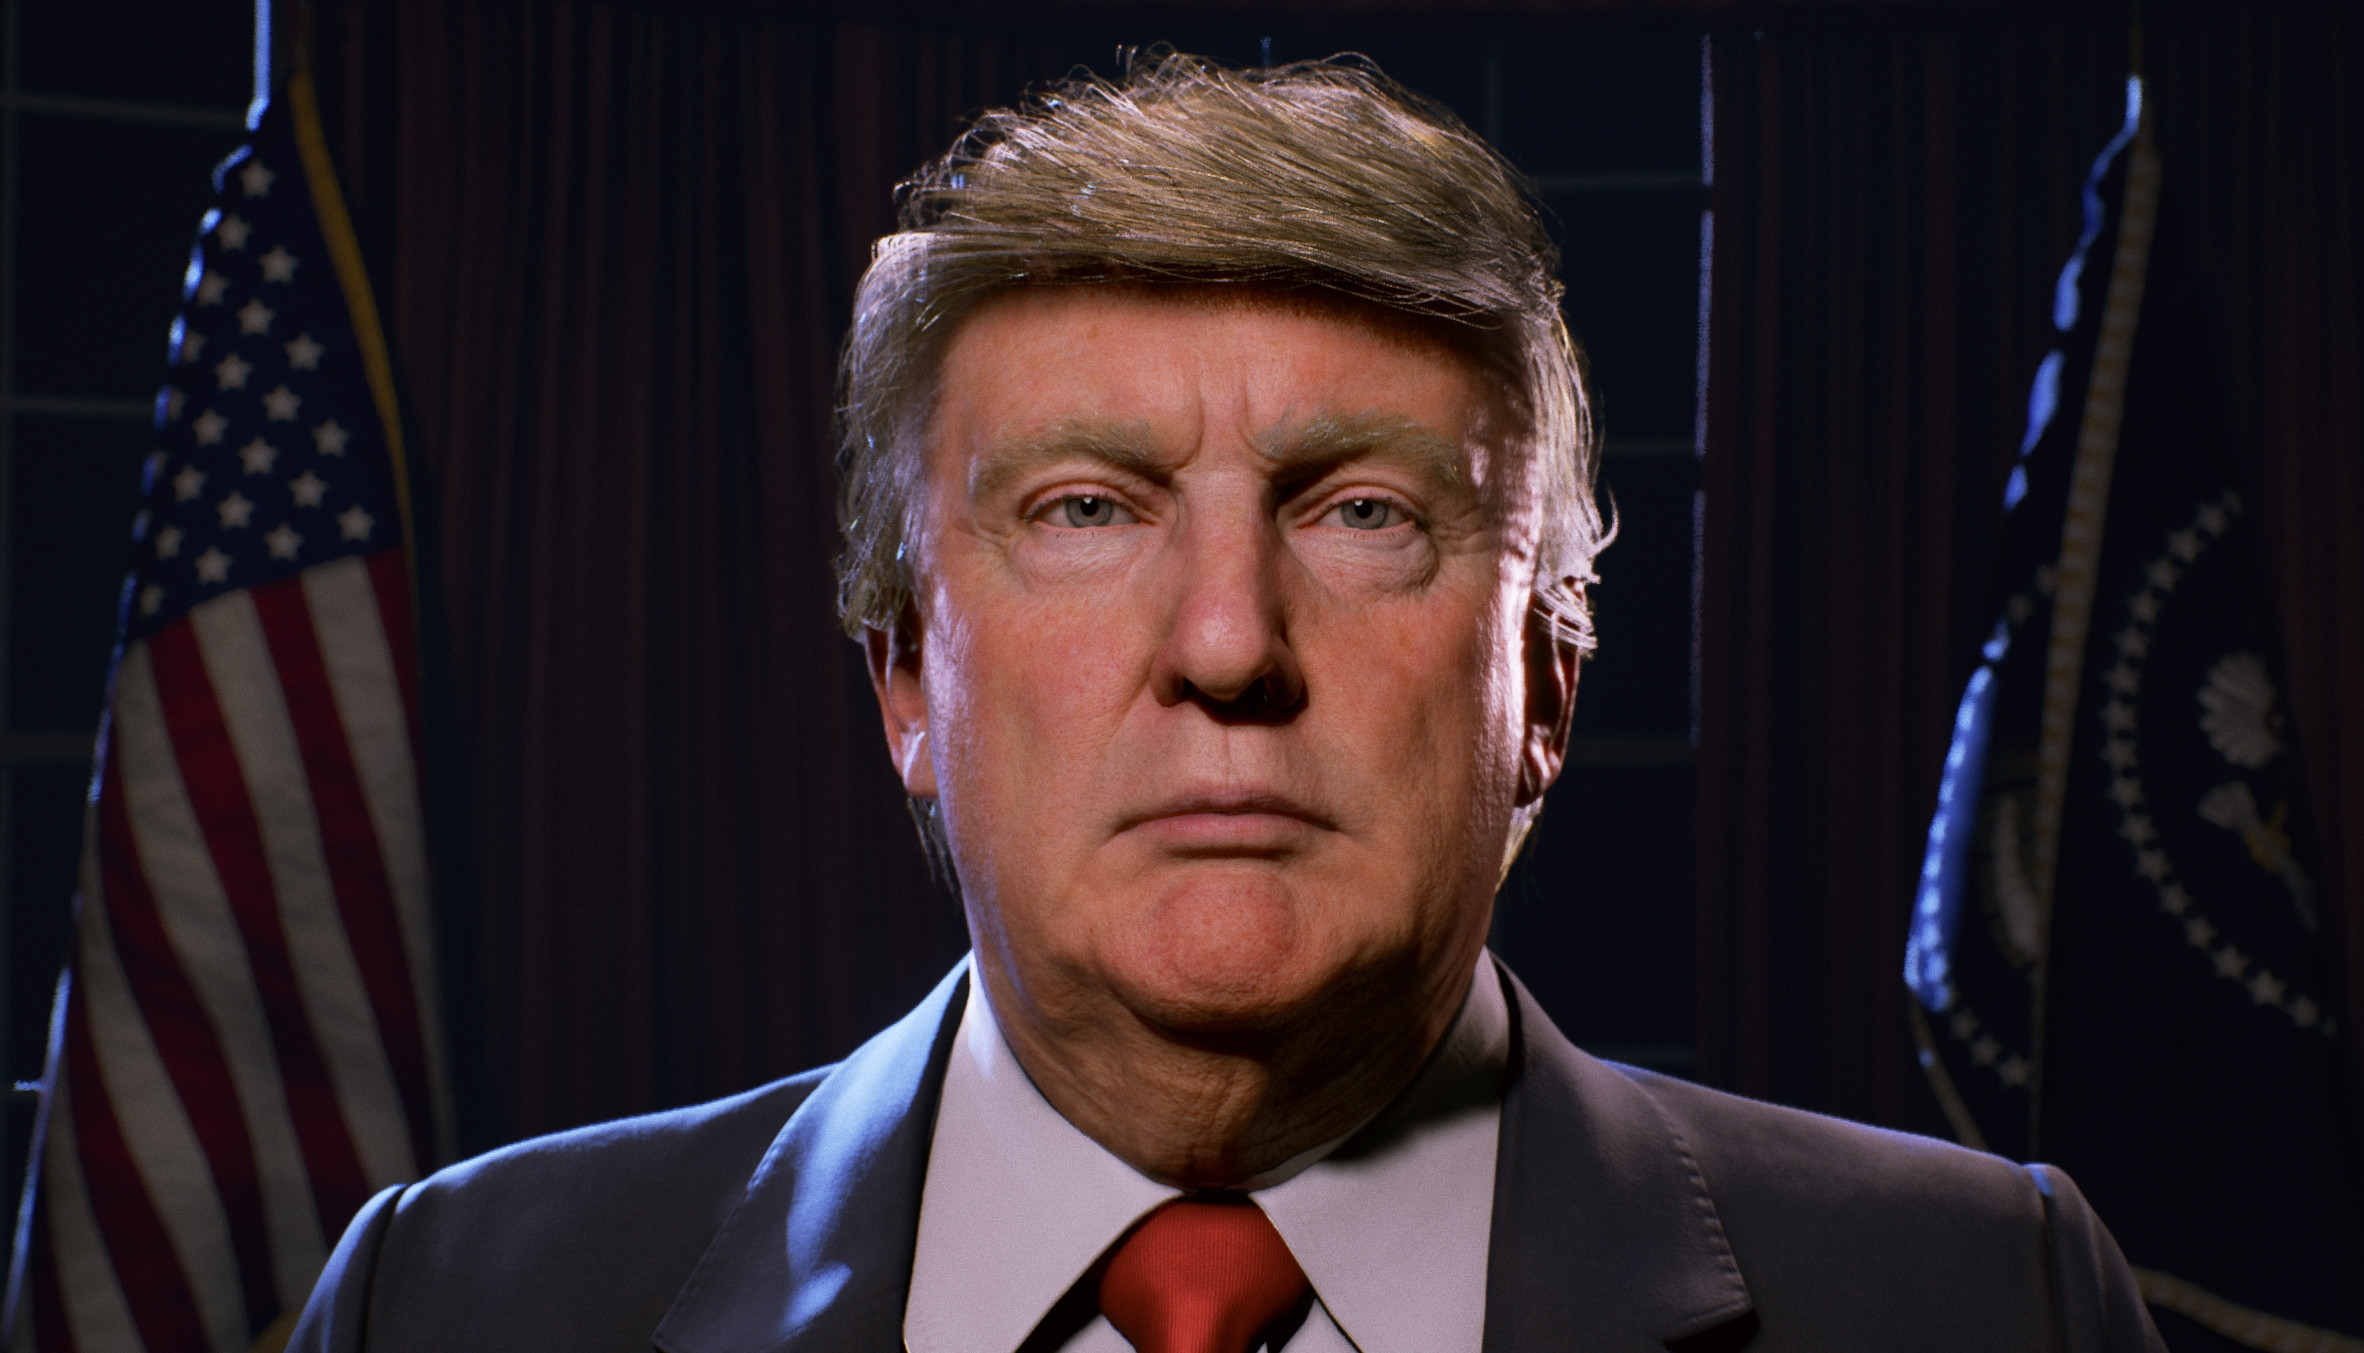 Trump in the house you can try it here : 
you can try it here : https://www.viveport.com/apps/c6947061-124e-4315-ab0b-6208c1bb77f9